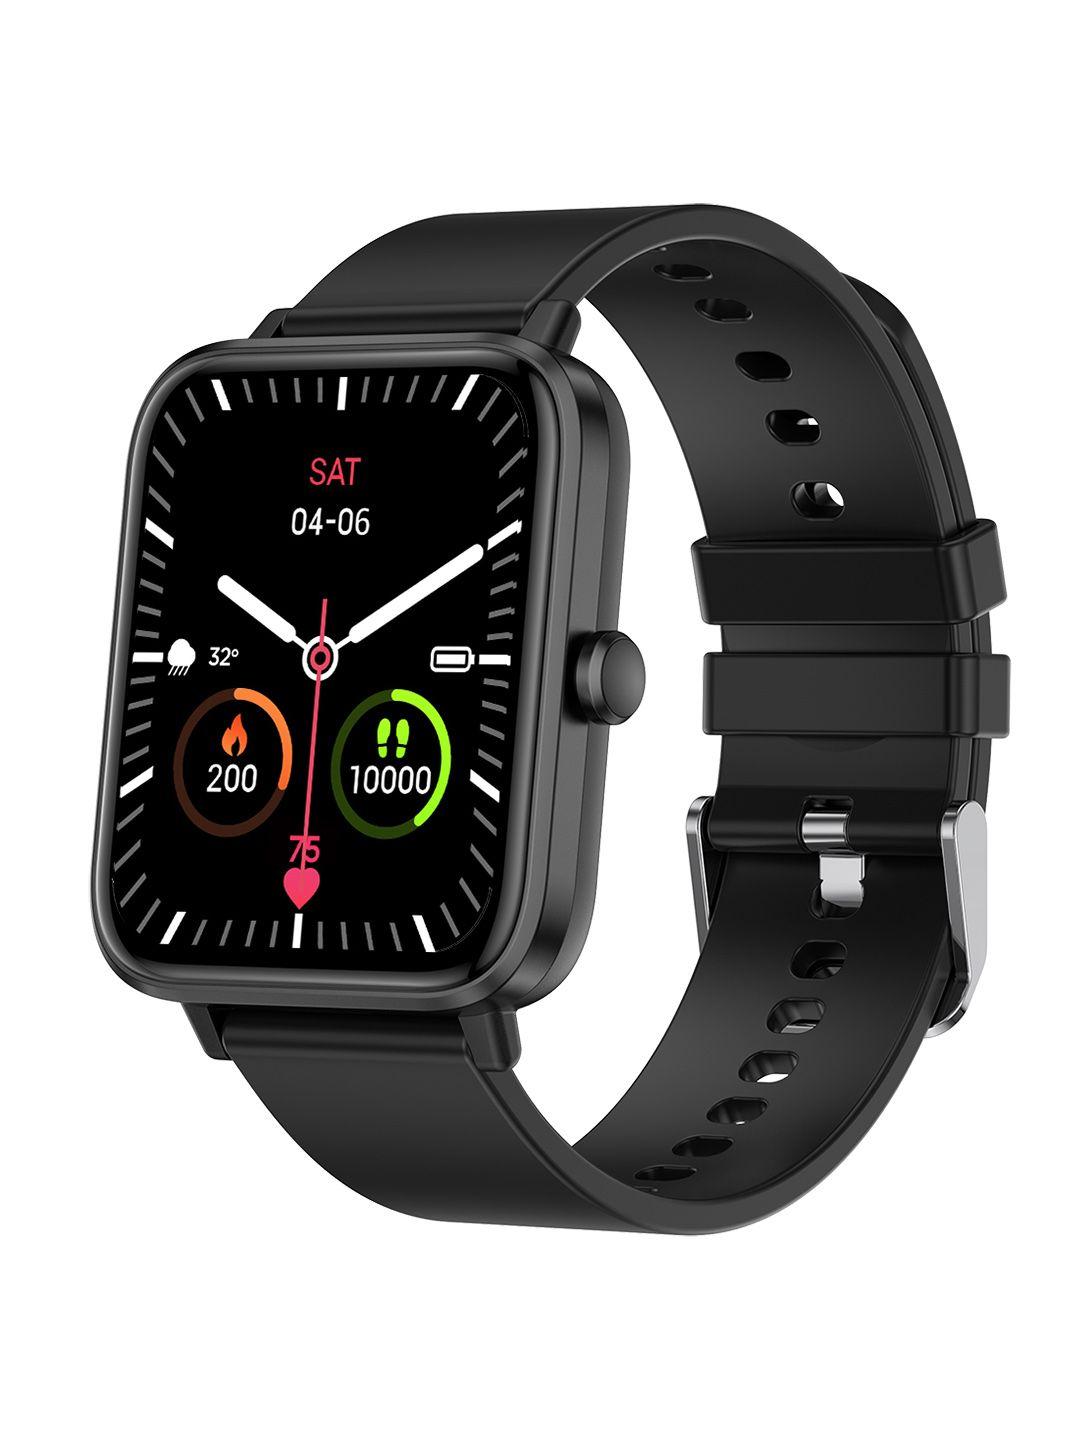 fire-boltt ninja calling pro 1.69 inch smartwatch with bluetooth calling & ai voice